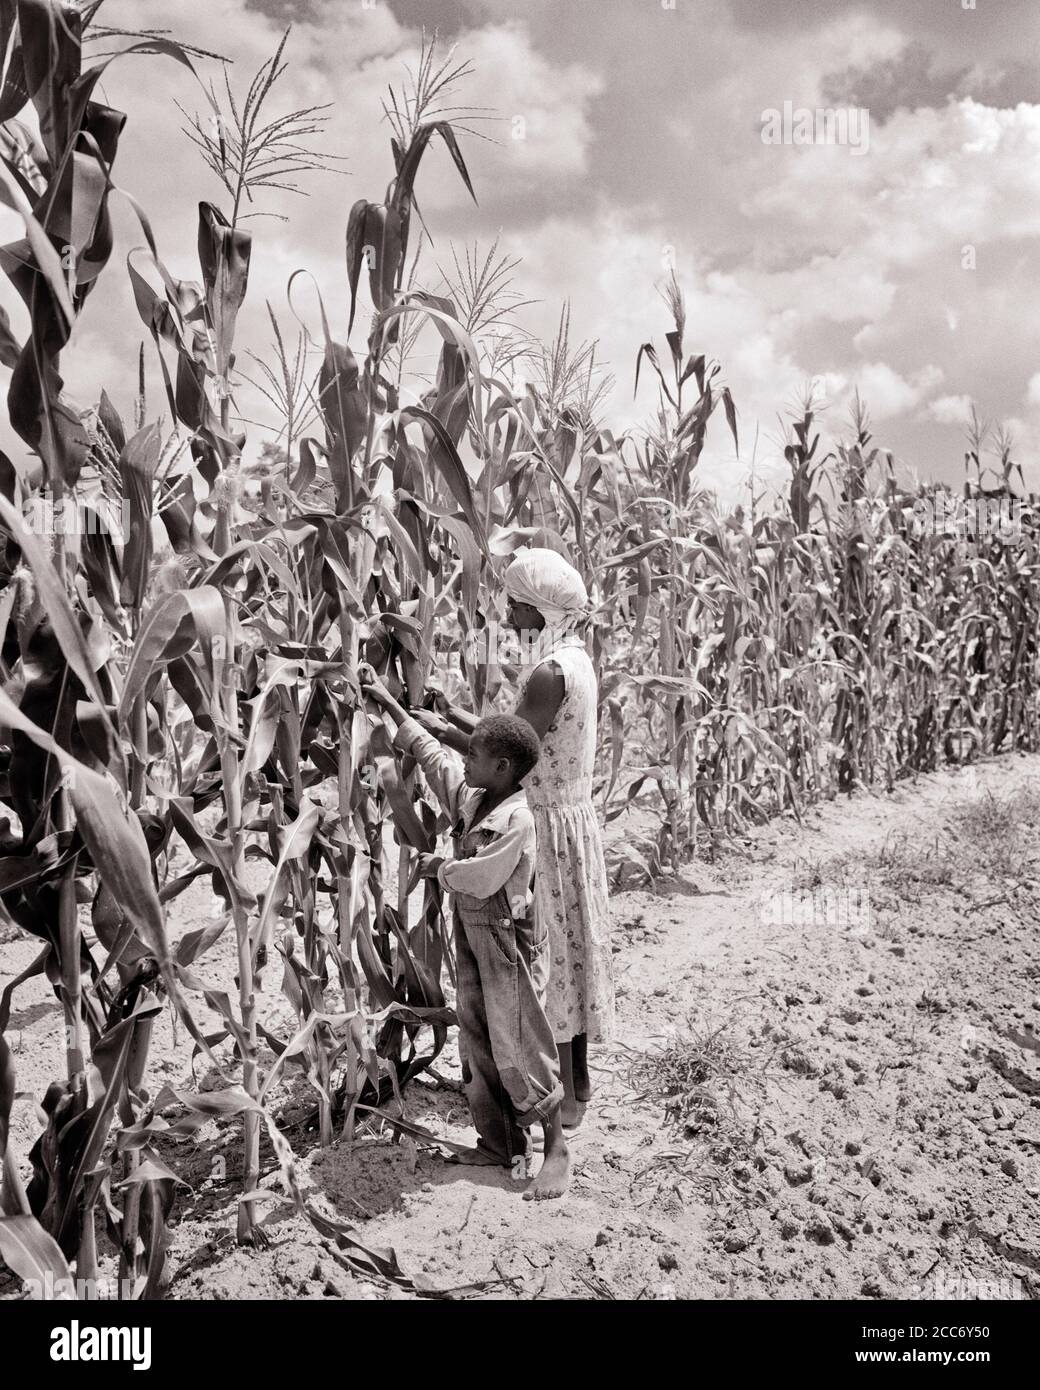 1930s AFRICAN-AMERICAN FARM WOMAN MOTHER AND BOY SON IN FIELD SELECTING HARVESTING PICKING EARS OF CORN TO EAT ALABAMA USA - n75 HAR001 HARS OLD TIME BUSY NOSTALGIA OLD FASHION 1 CORN JUVENILE EARS STYLE FEAR YOUNG ADULT TEAMWORK PICKING SONS FAMILIES LIFESTYLE FEMALES POOR RURAL HOME LIFE UNITED STATES COPY SPACE FULL-LENGTH LADIES PERSONS UNITED STATES OF AMERICA FARMING MALES RISK ALABAMA AGRICULTURE B&W NORTH AMERICA FREEDOM HARVESTING NORTH AMERICAN DREAMS HIGH ANGLE AFRICAN-AMERICANS AFRICAN-AMERICAN AND FARMERS SOUTHEAST BLACK ETHNICITY IN OF TO BAREFOOT OCCUPATIONS SOUTHERN CONNECTION Stock Photo